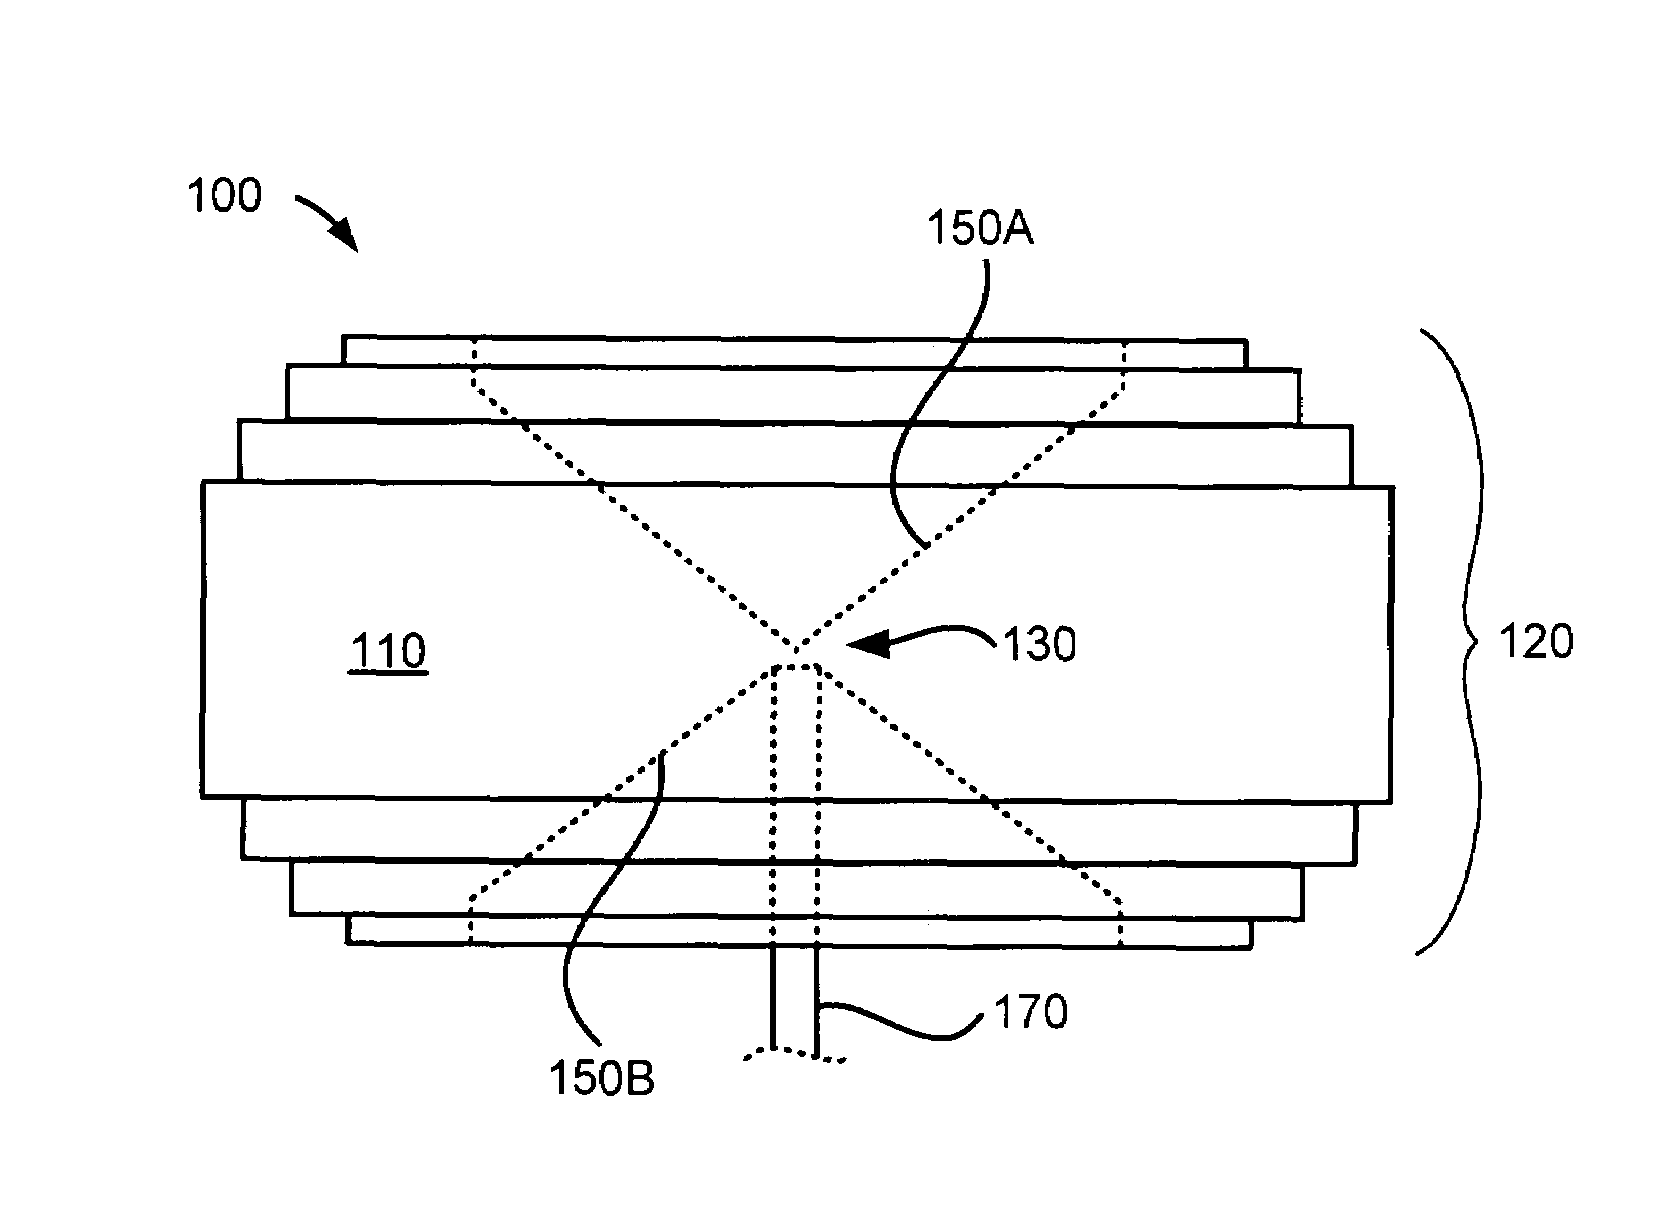 Bicone pattern shaping device